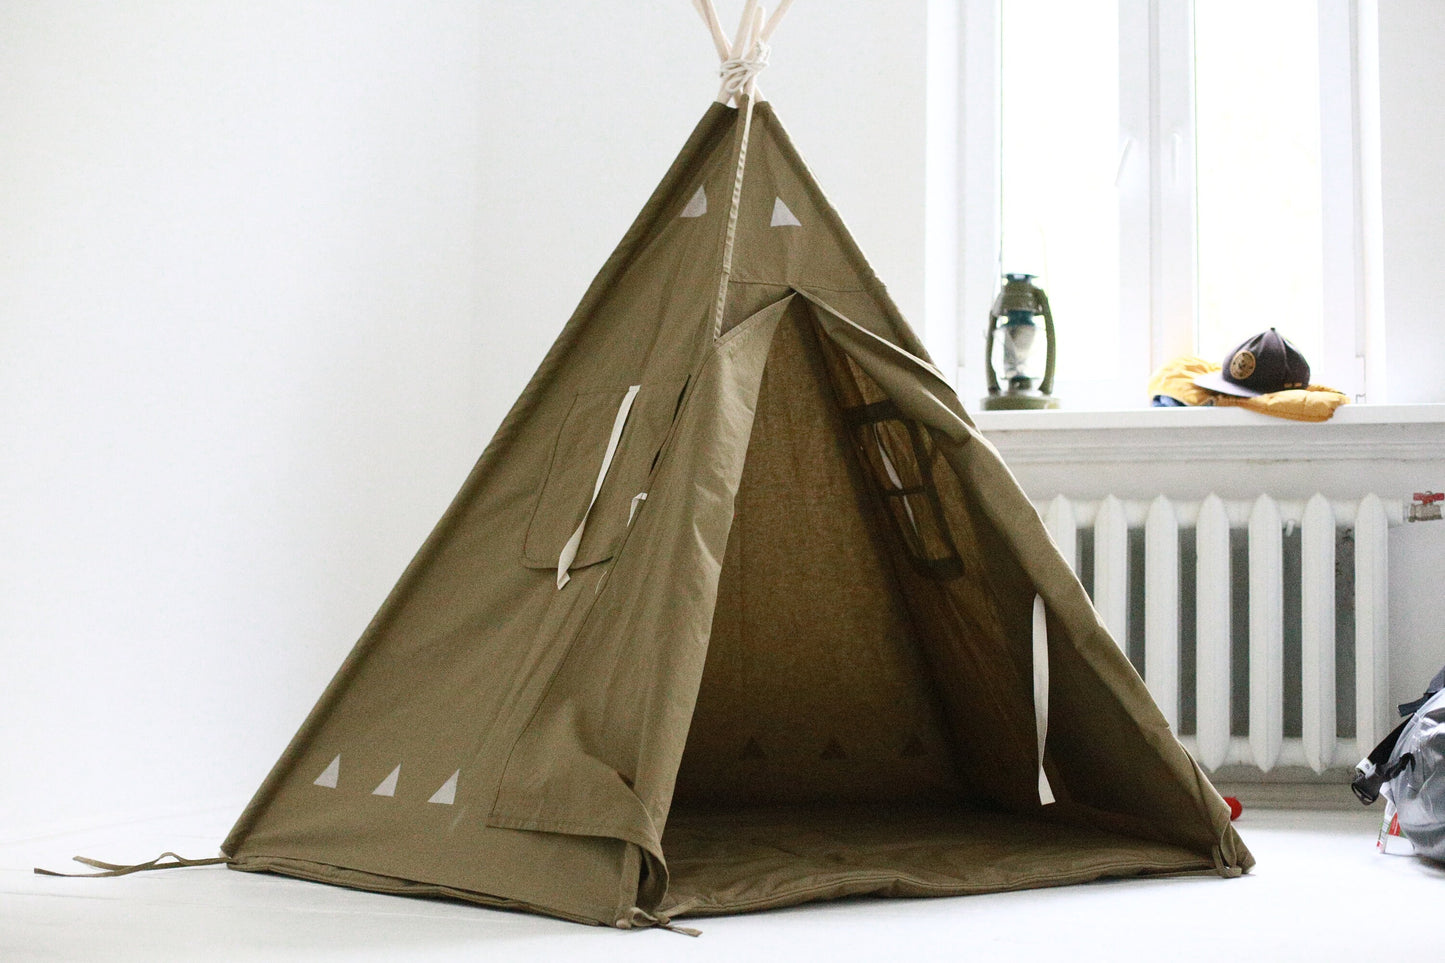 Christmas presents - Kid tent. Green cotton indoor teepee with soft warm mat and decorative lights - is the Best playhouse for toddlers gift